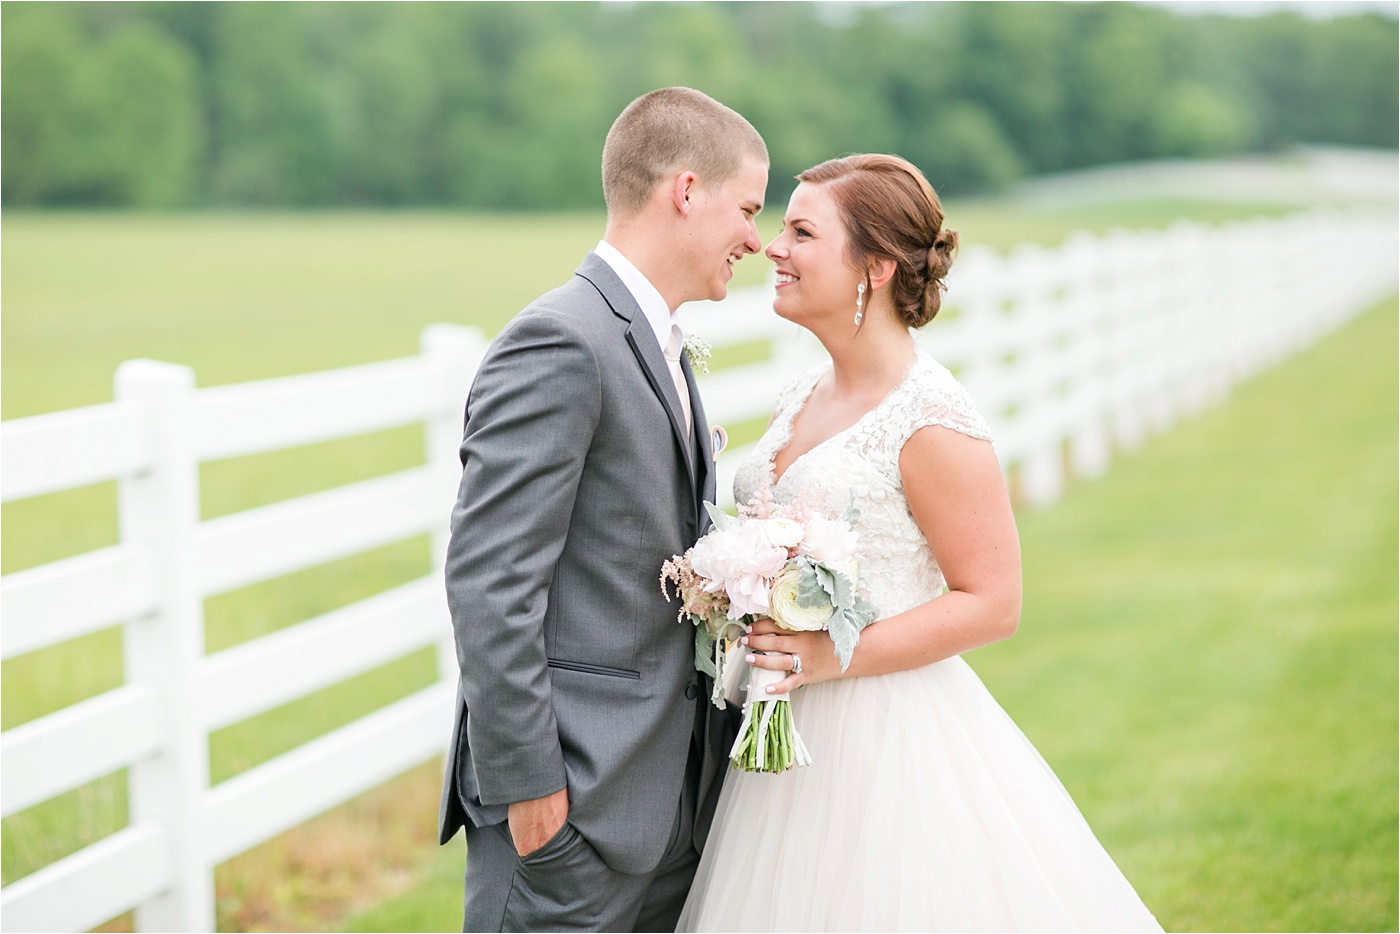 A Blush Outdoor wedding at Irongate Equestrian | KariMe Photography_0136